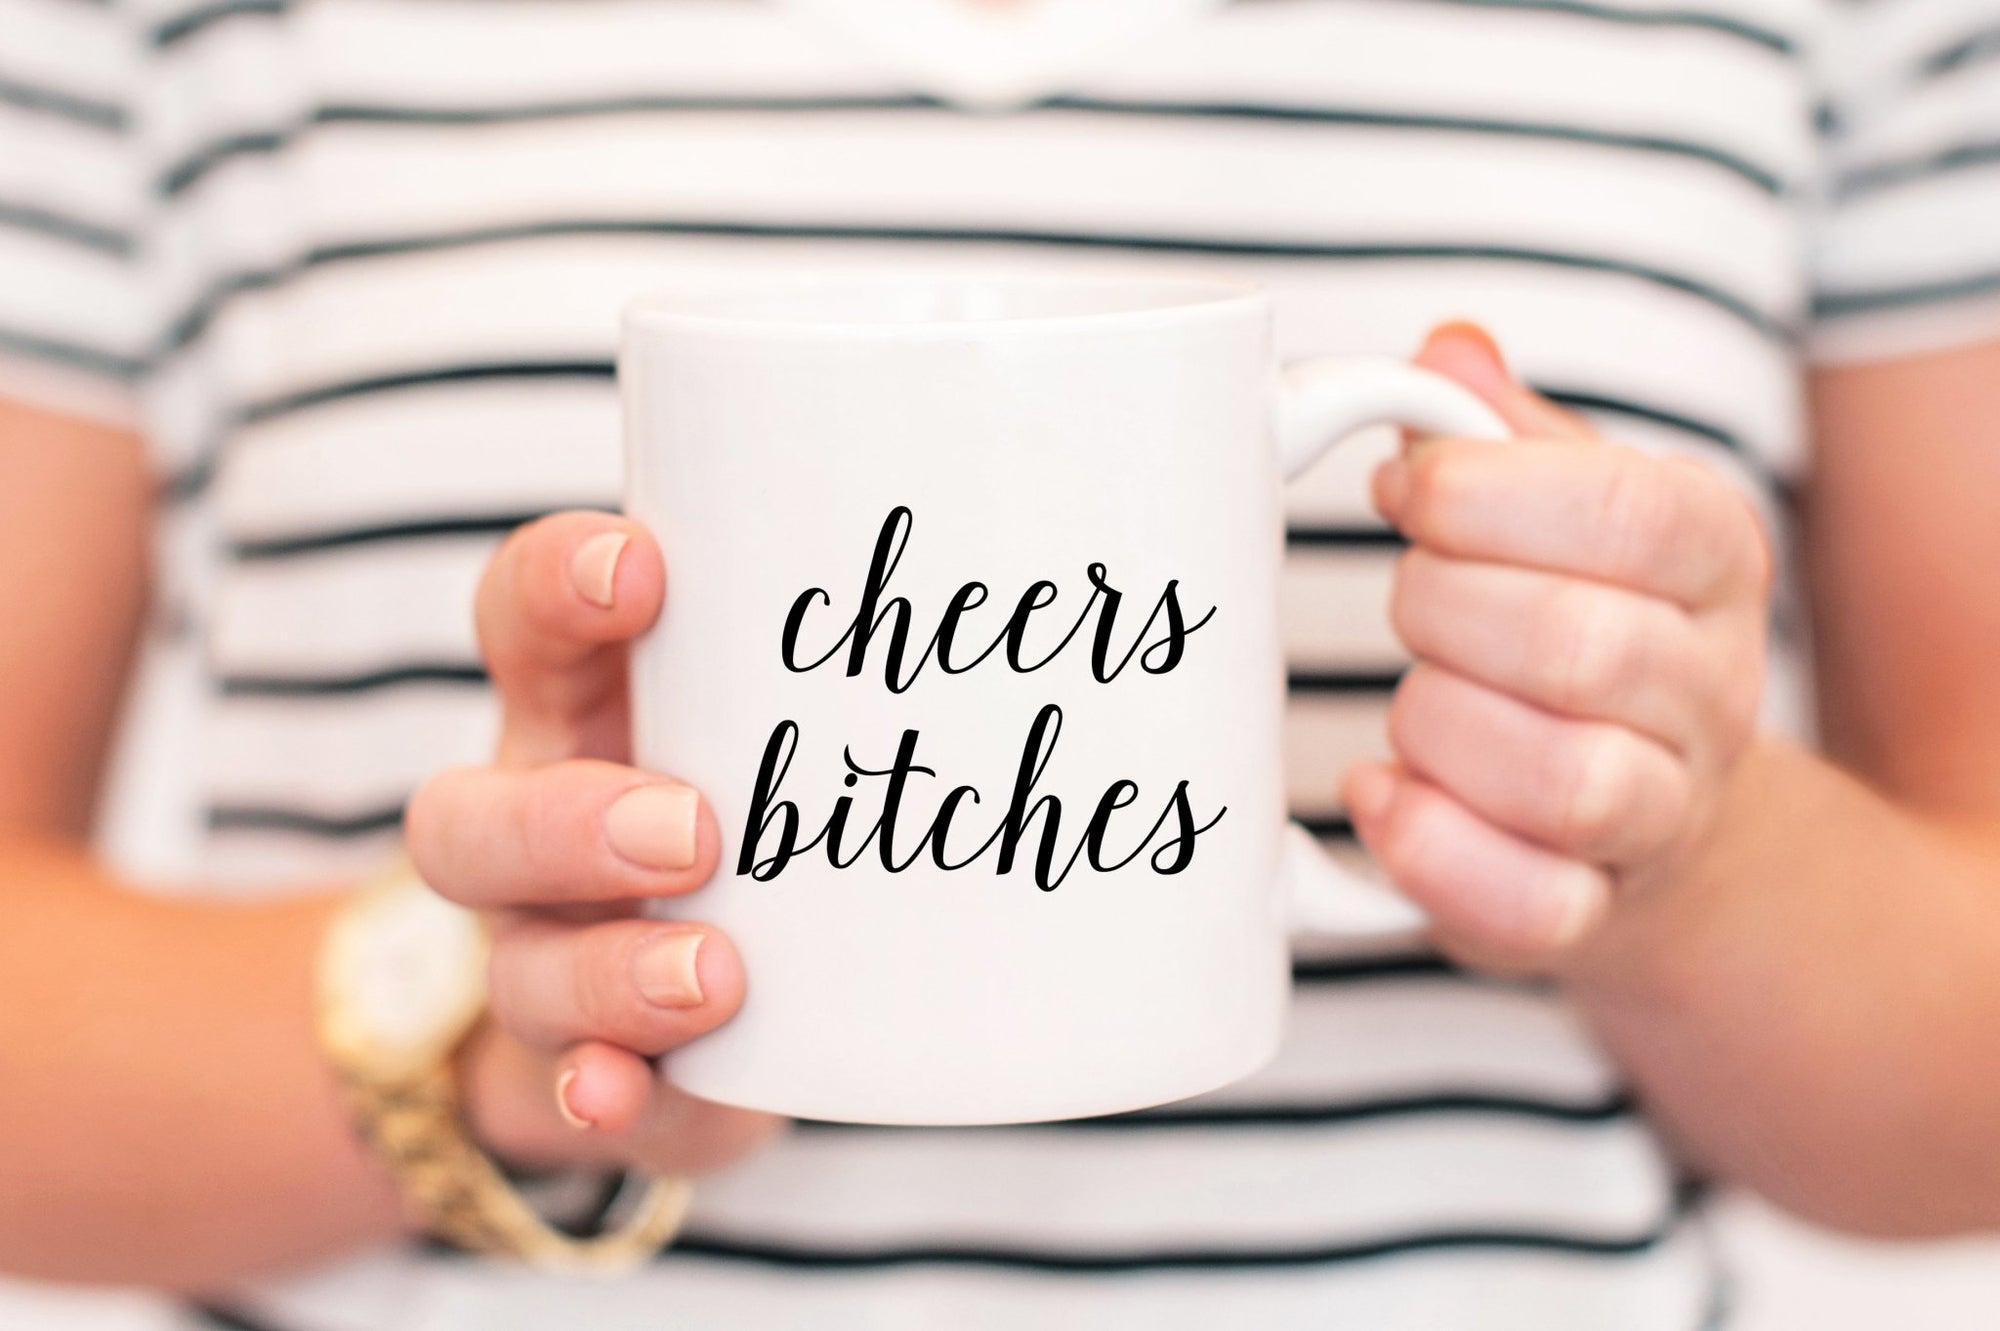 Cheers Bitches Mug - Pretty Collected